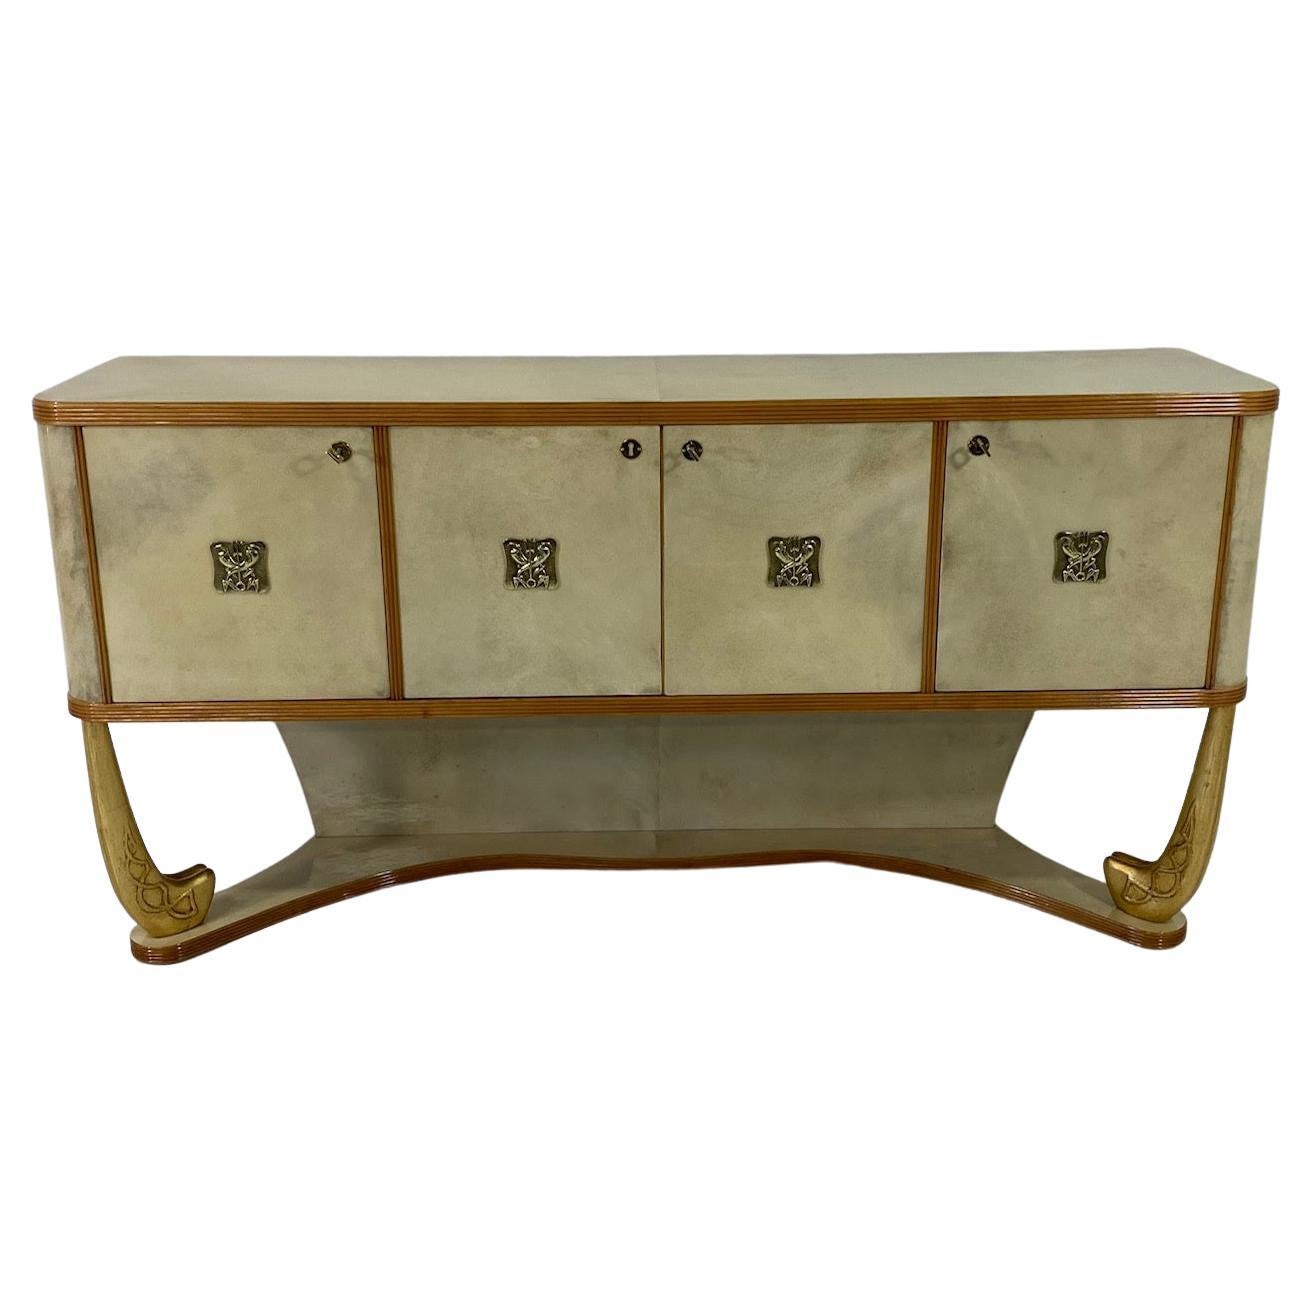 Italian Art Deco Parchment, Maple, Gold and Brass Sideboard, Attr. to Colli, 30s